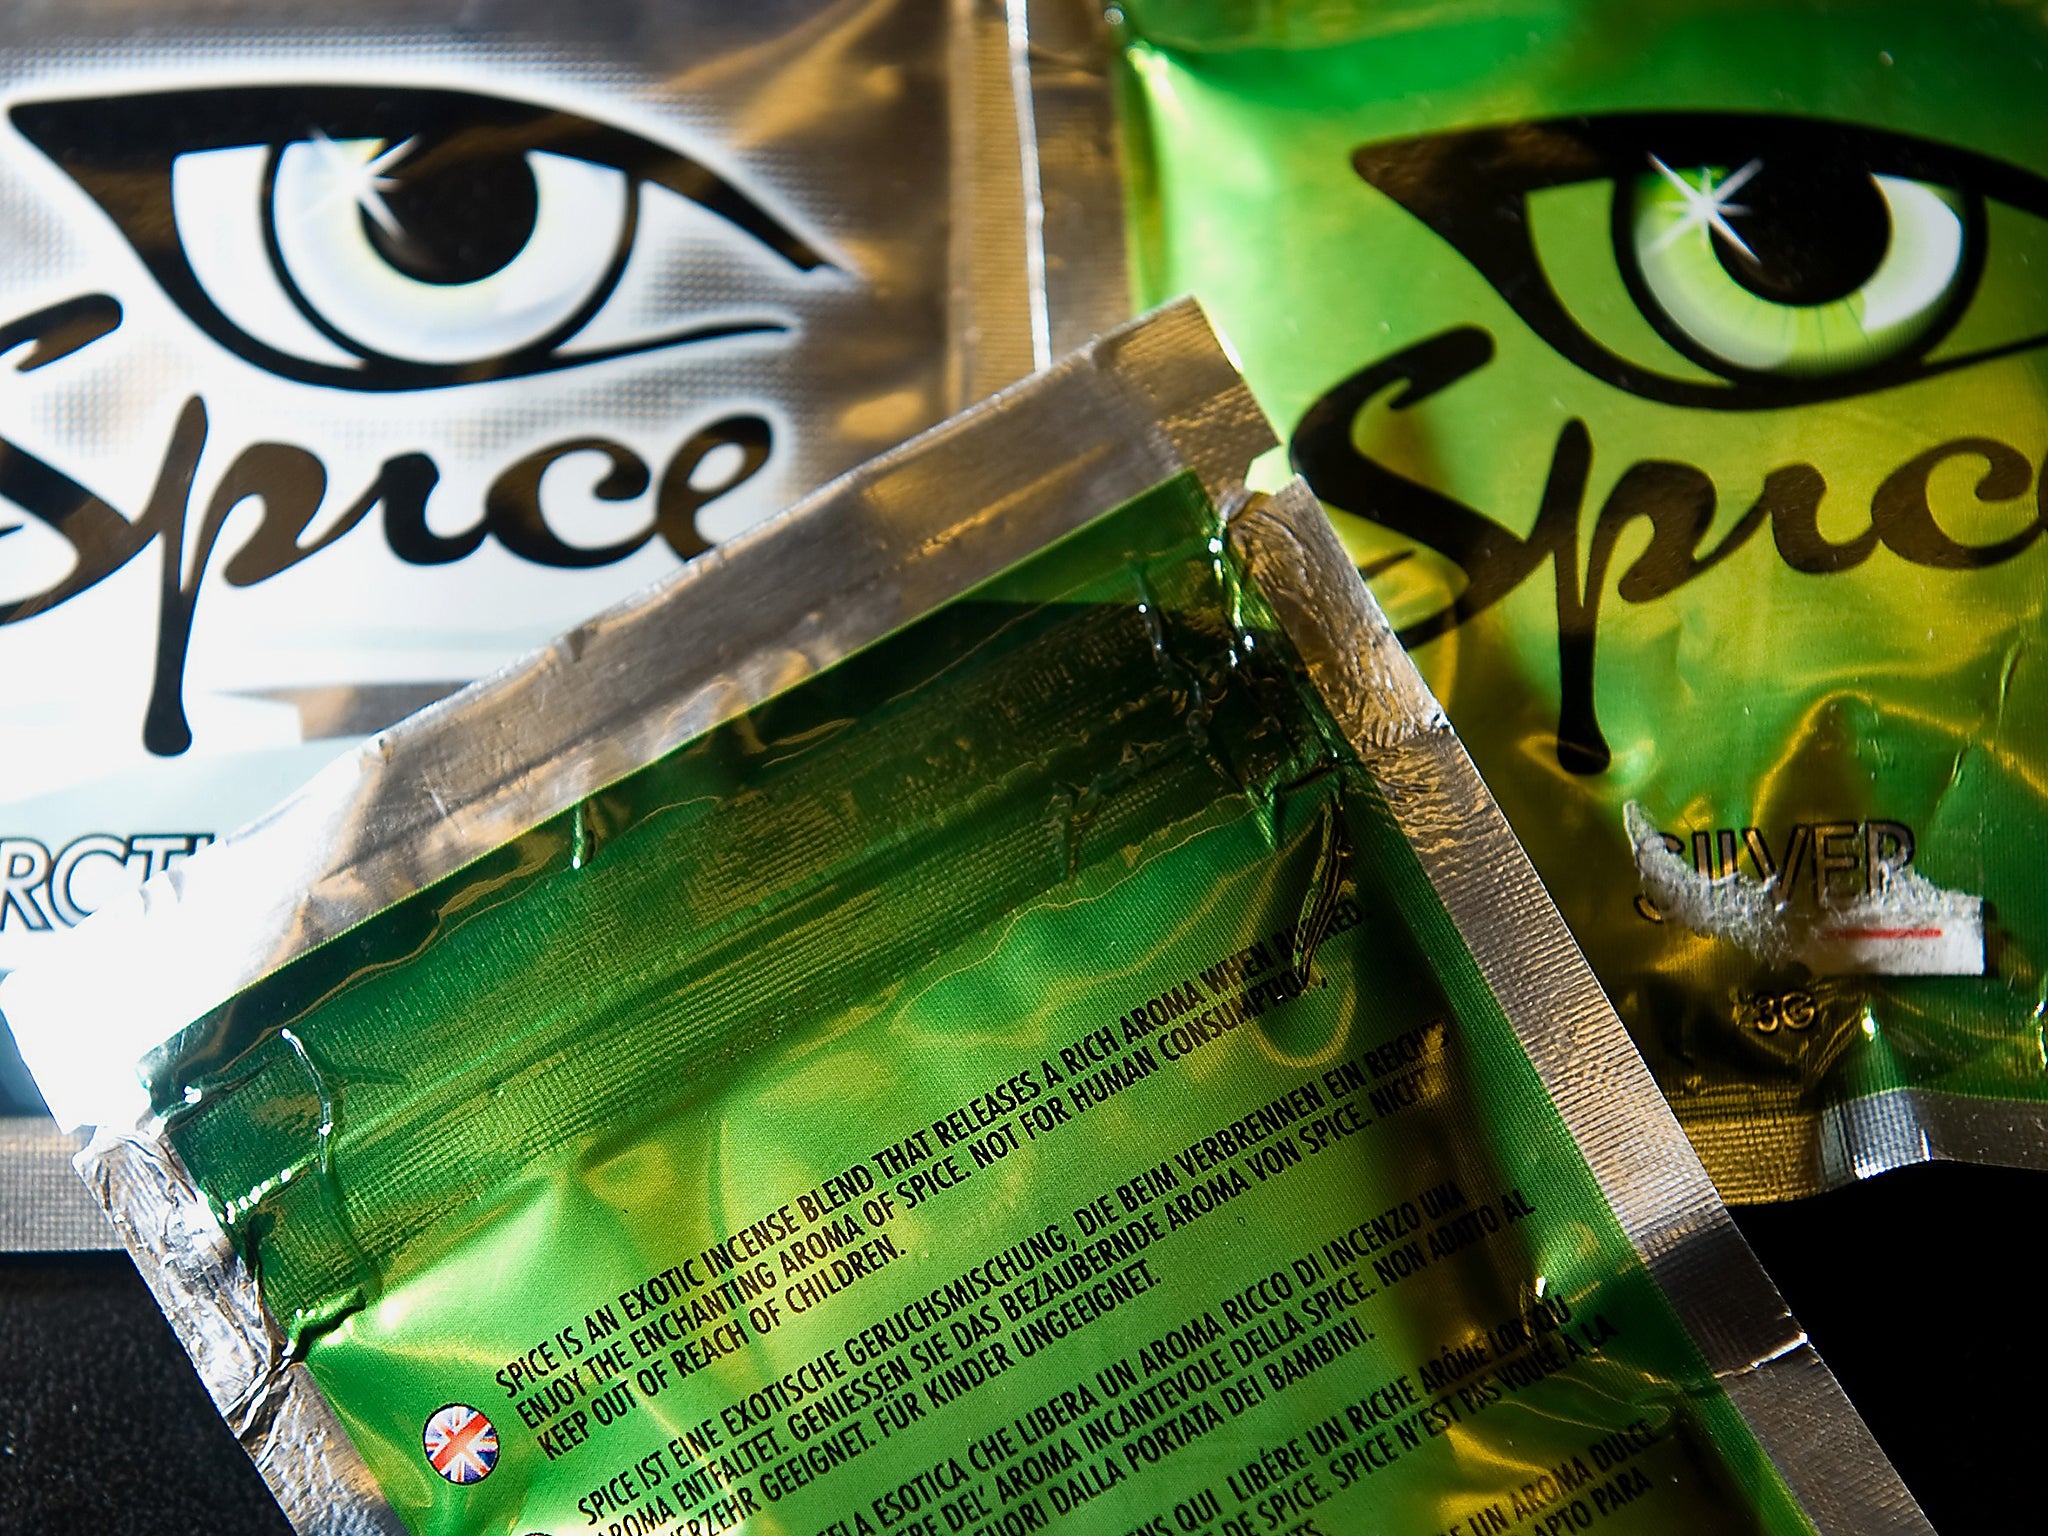 Legal highs are often sold as plant food, incense or research chemicals, with some labelled 'not fit for human consumption'